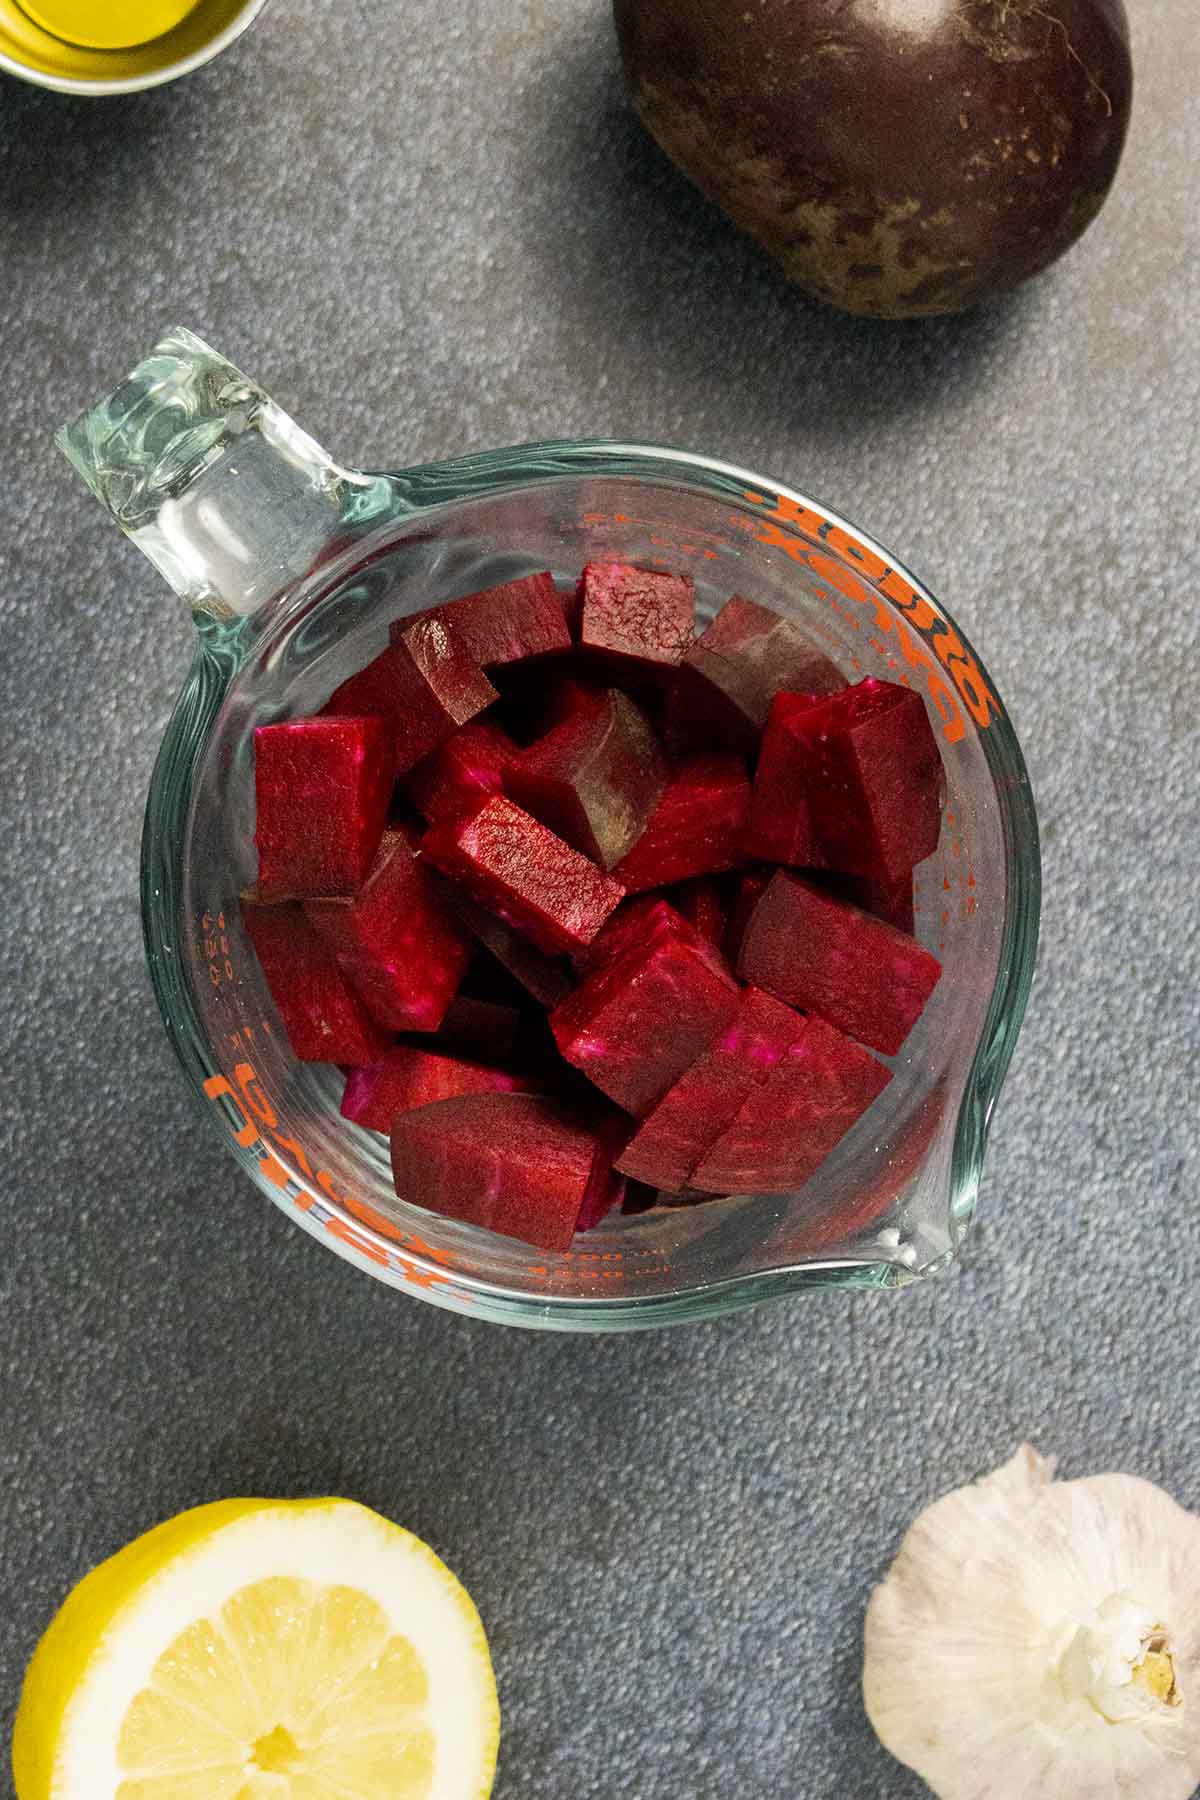 diced beets in a measuring cup with lemon, garlic, and a whole beet on a dark table